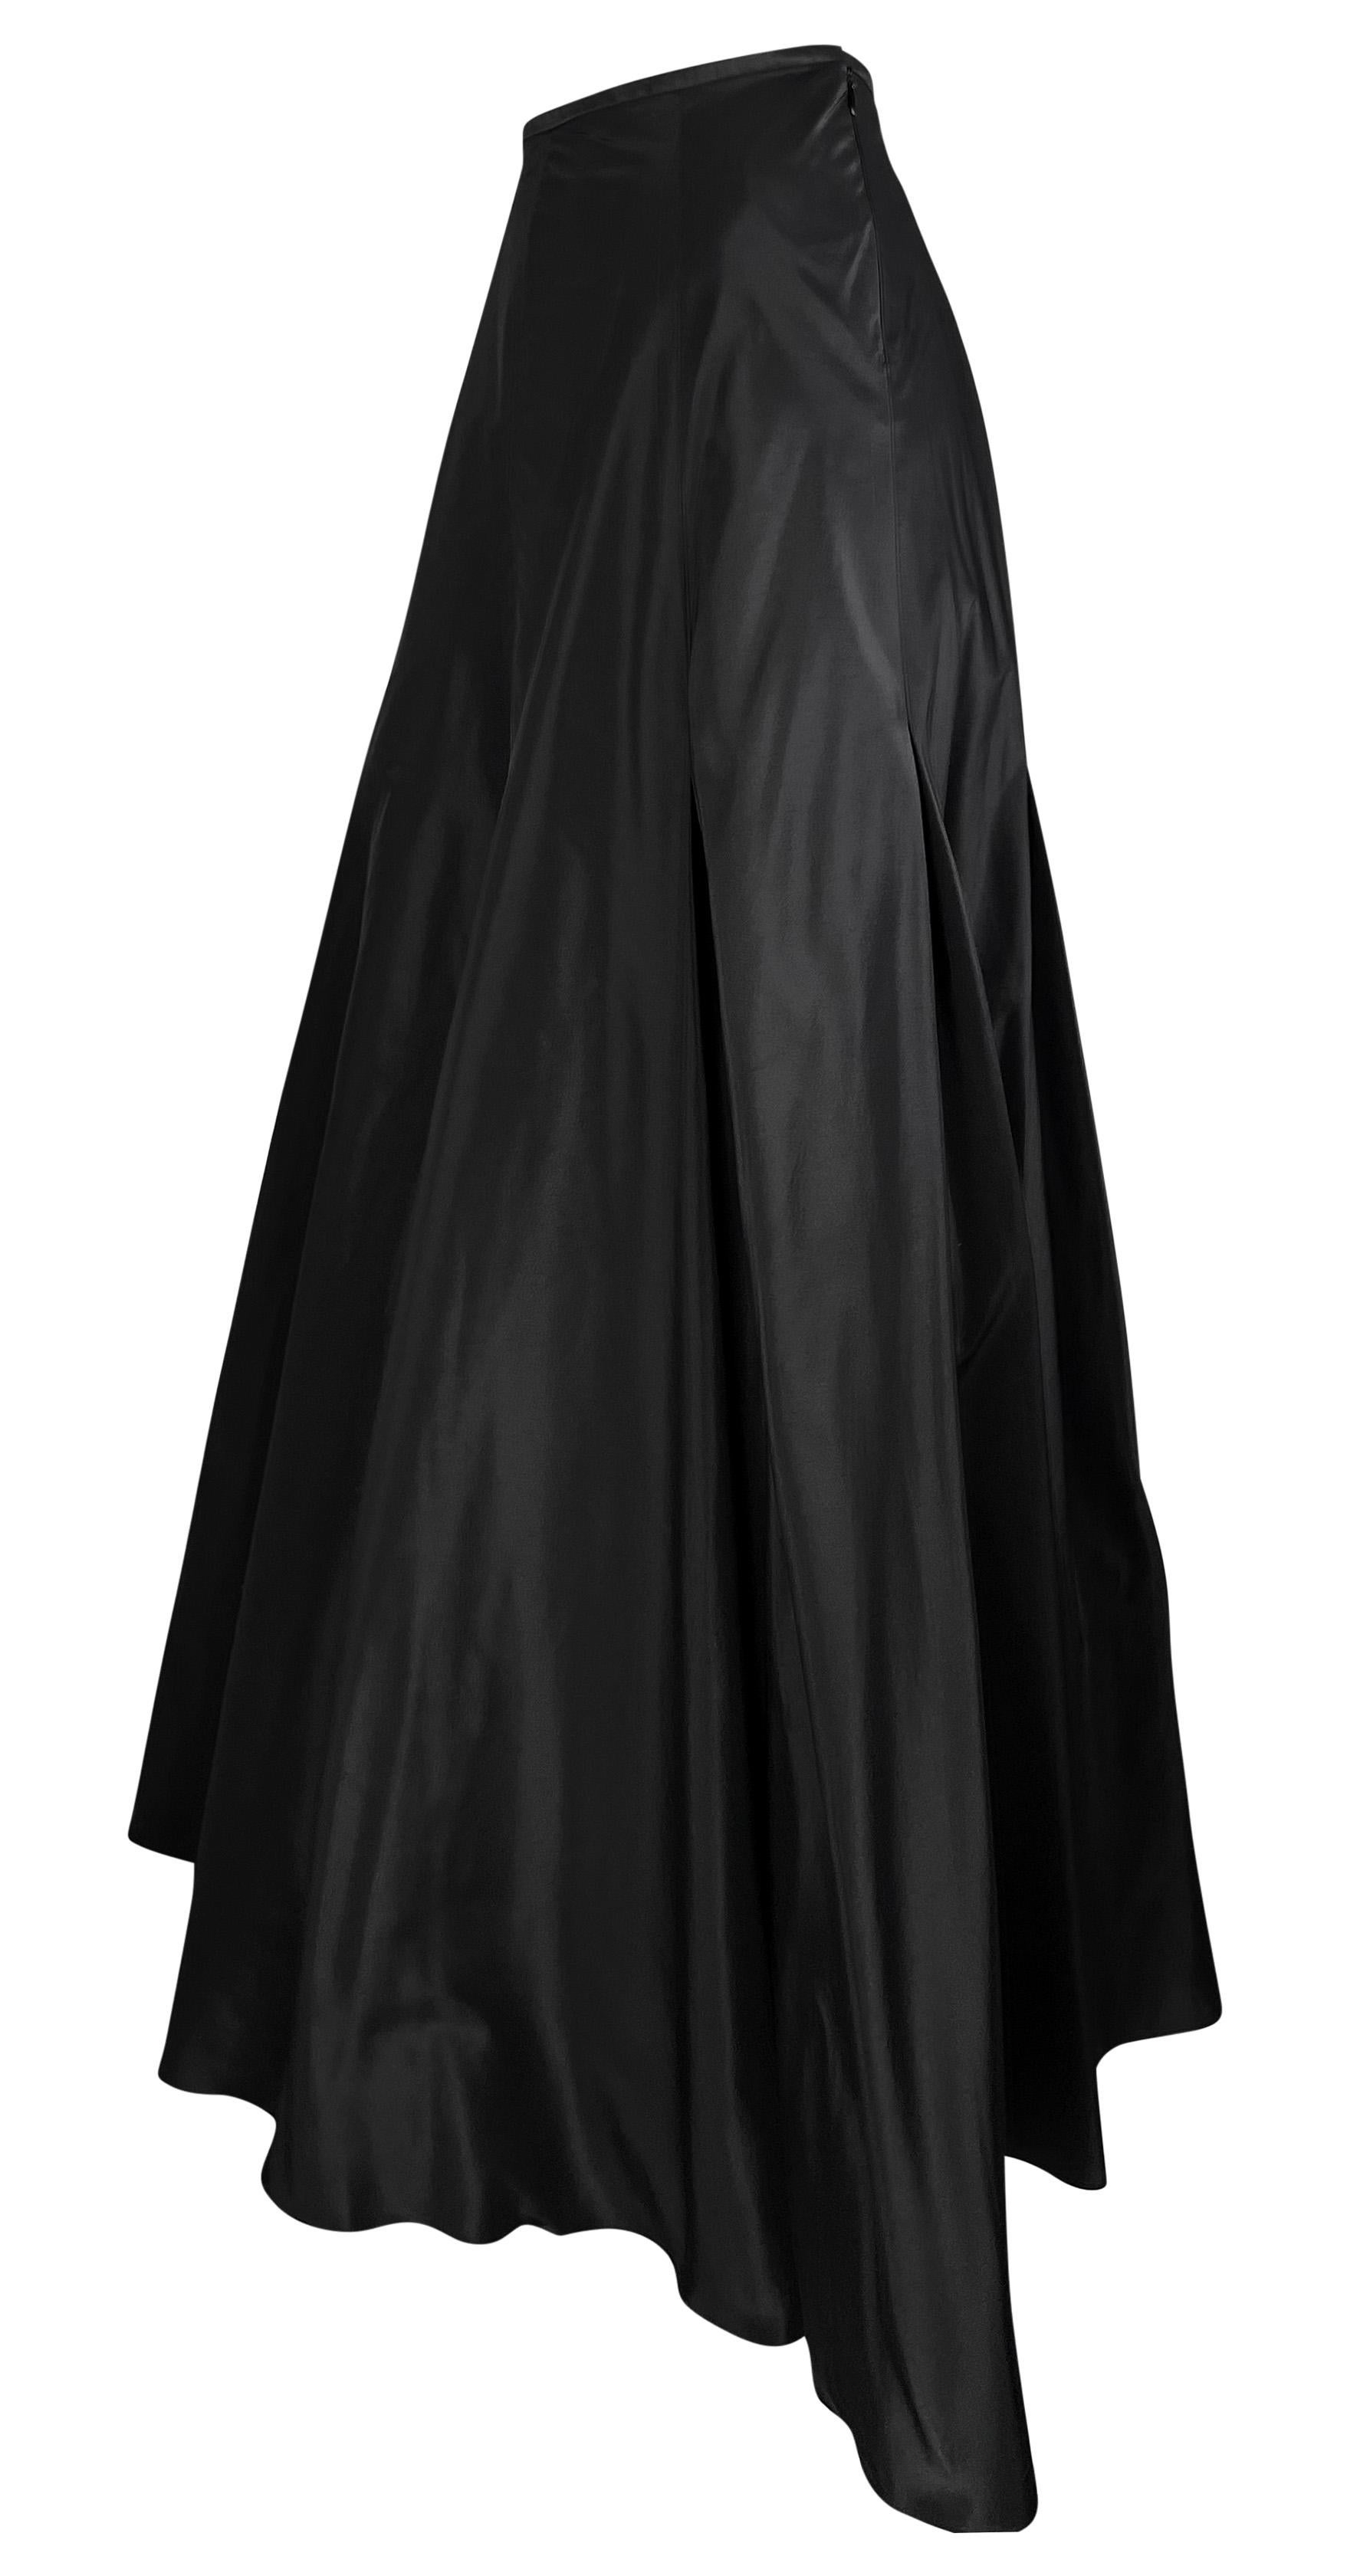 Late 1990s Ralph Lauren Black Silk Taffeta Voluminous Maxi Evening Skirt In Excellent Condition For Sale In West Hollywood, CA